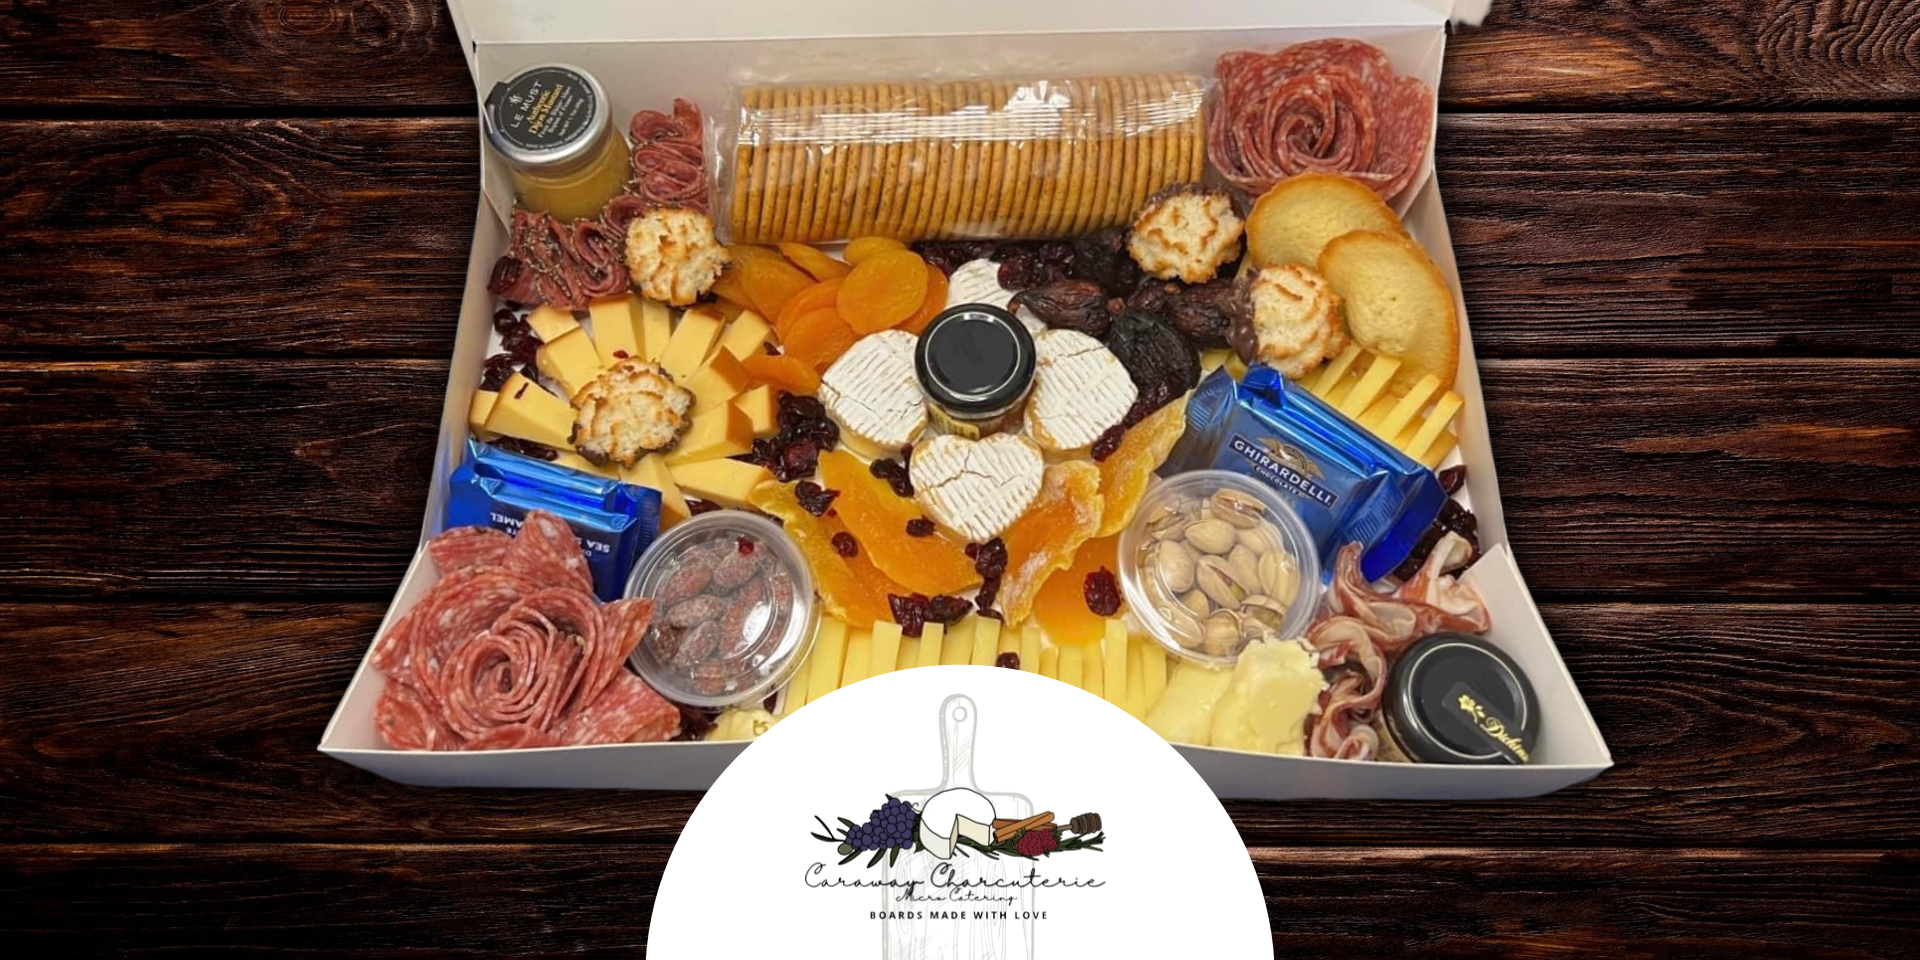 Caraway Charcuterie & Creations - Carson Valley Meats